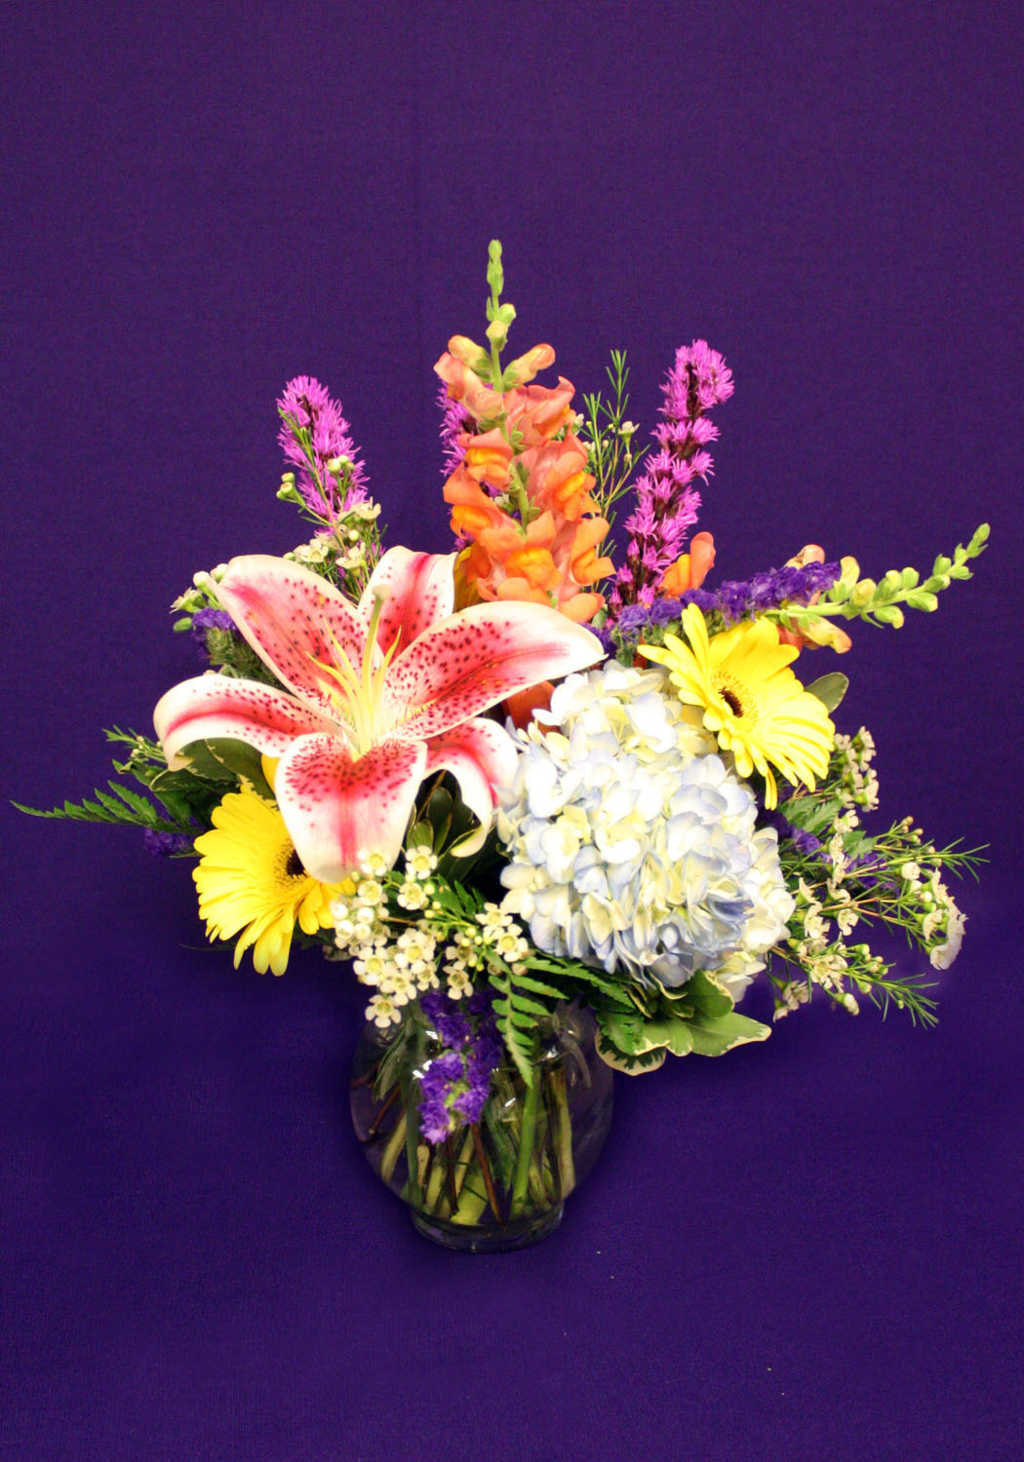 Floral arrangements with lillies, daisies, and delphiniums from Mon General Hospital Gift Shop